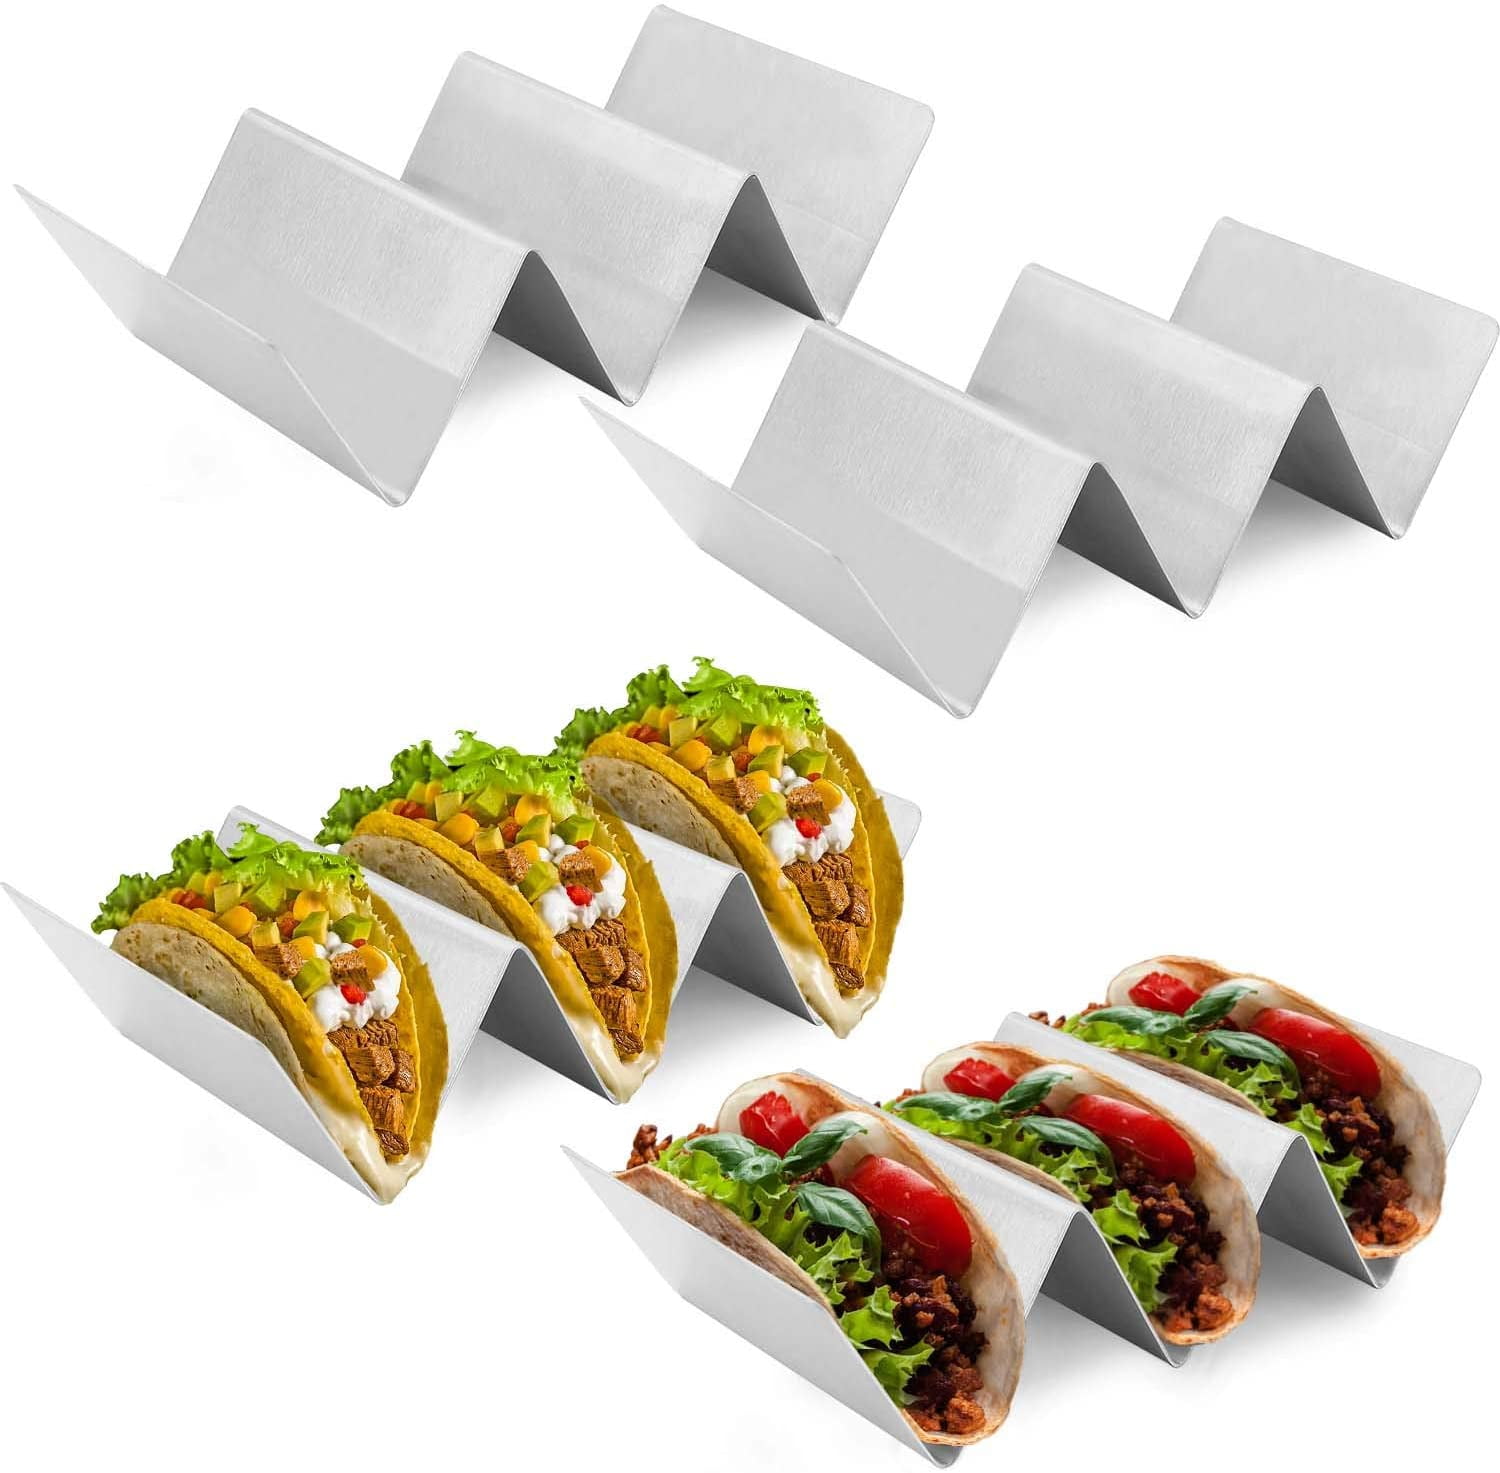 Oven and Grill Safe Stand Easy Clean Durable Reusable Restaurant Grade Diners Choice Taco Holder Stainless Steel Rack 8in x 4 in Dishwasher 2 Pack with Box 